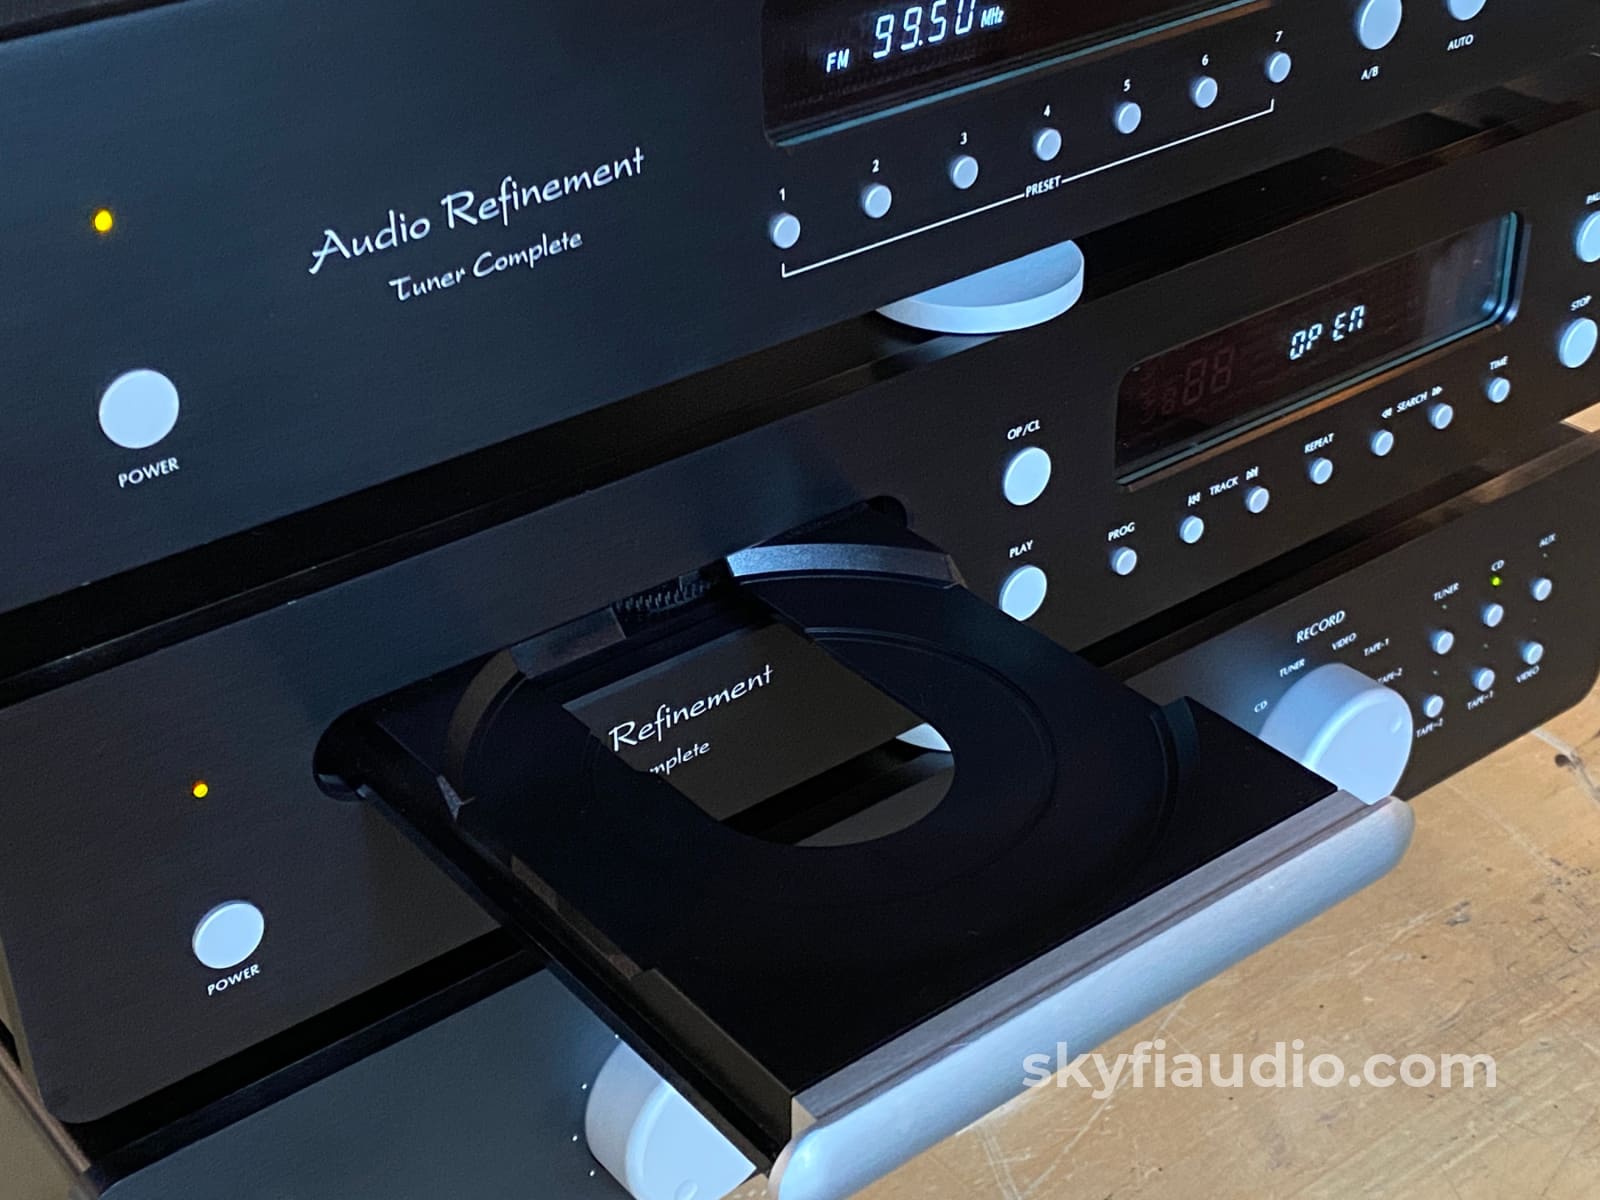 Audio Refinement Complete 3 Piece Set Integrated Cd And Tuner (Yba) Amplifier